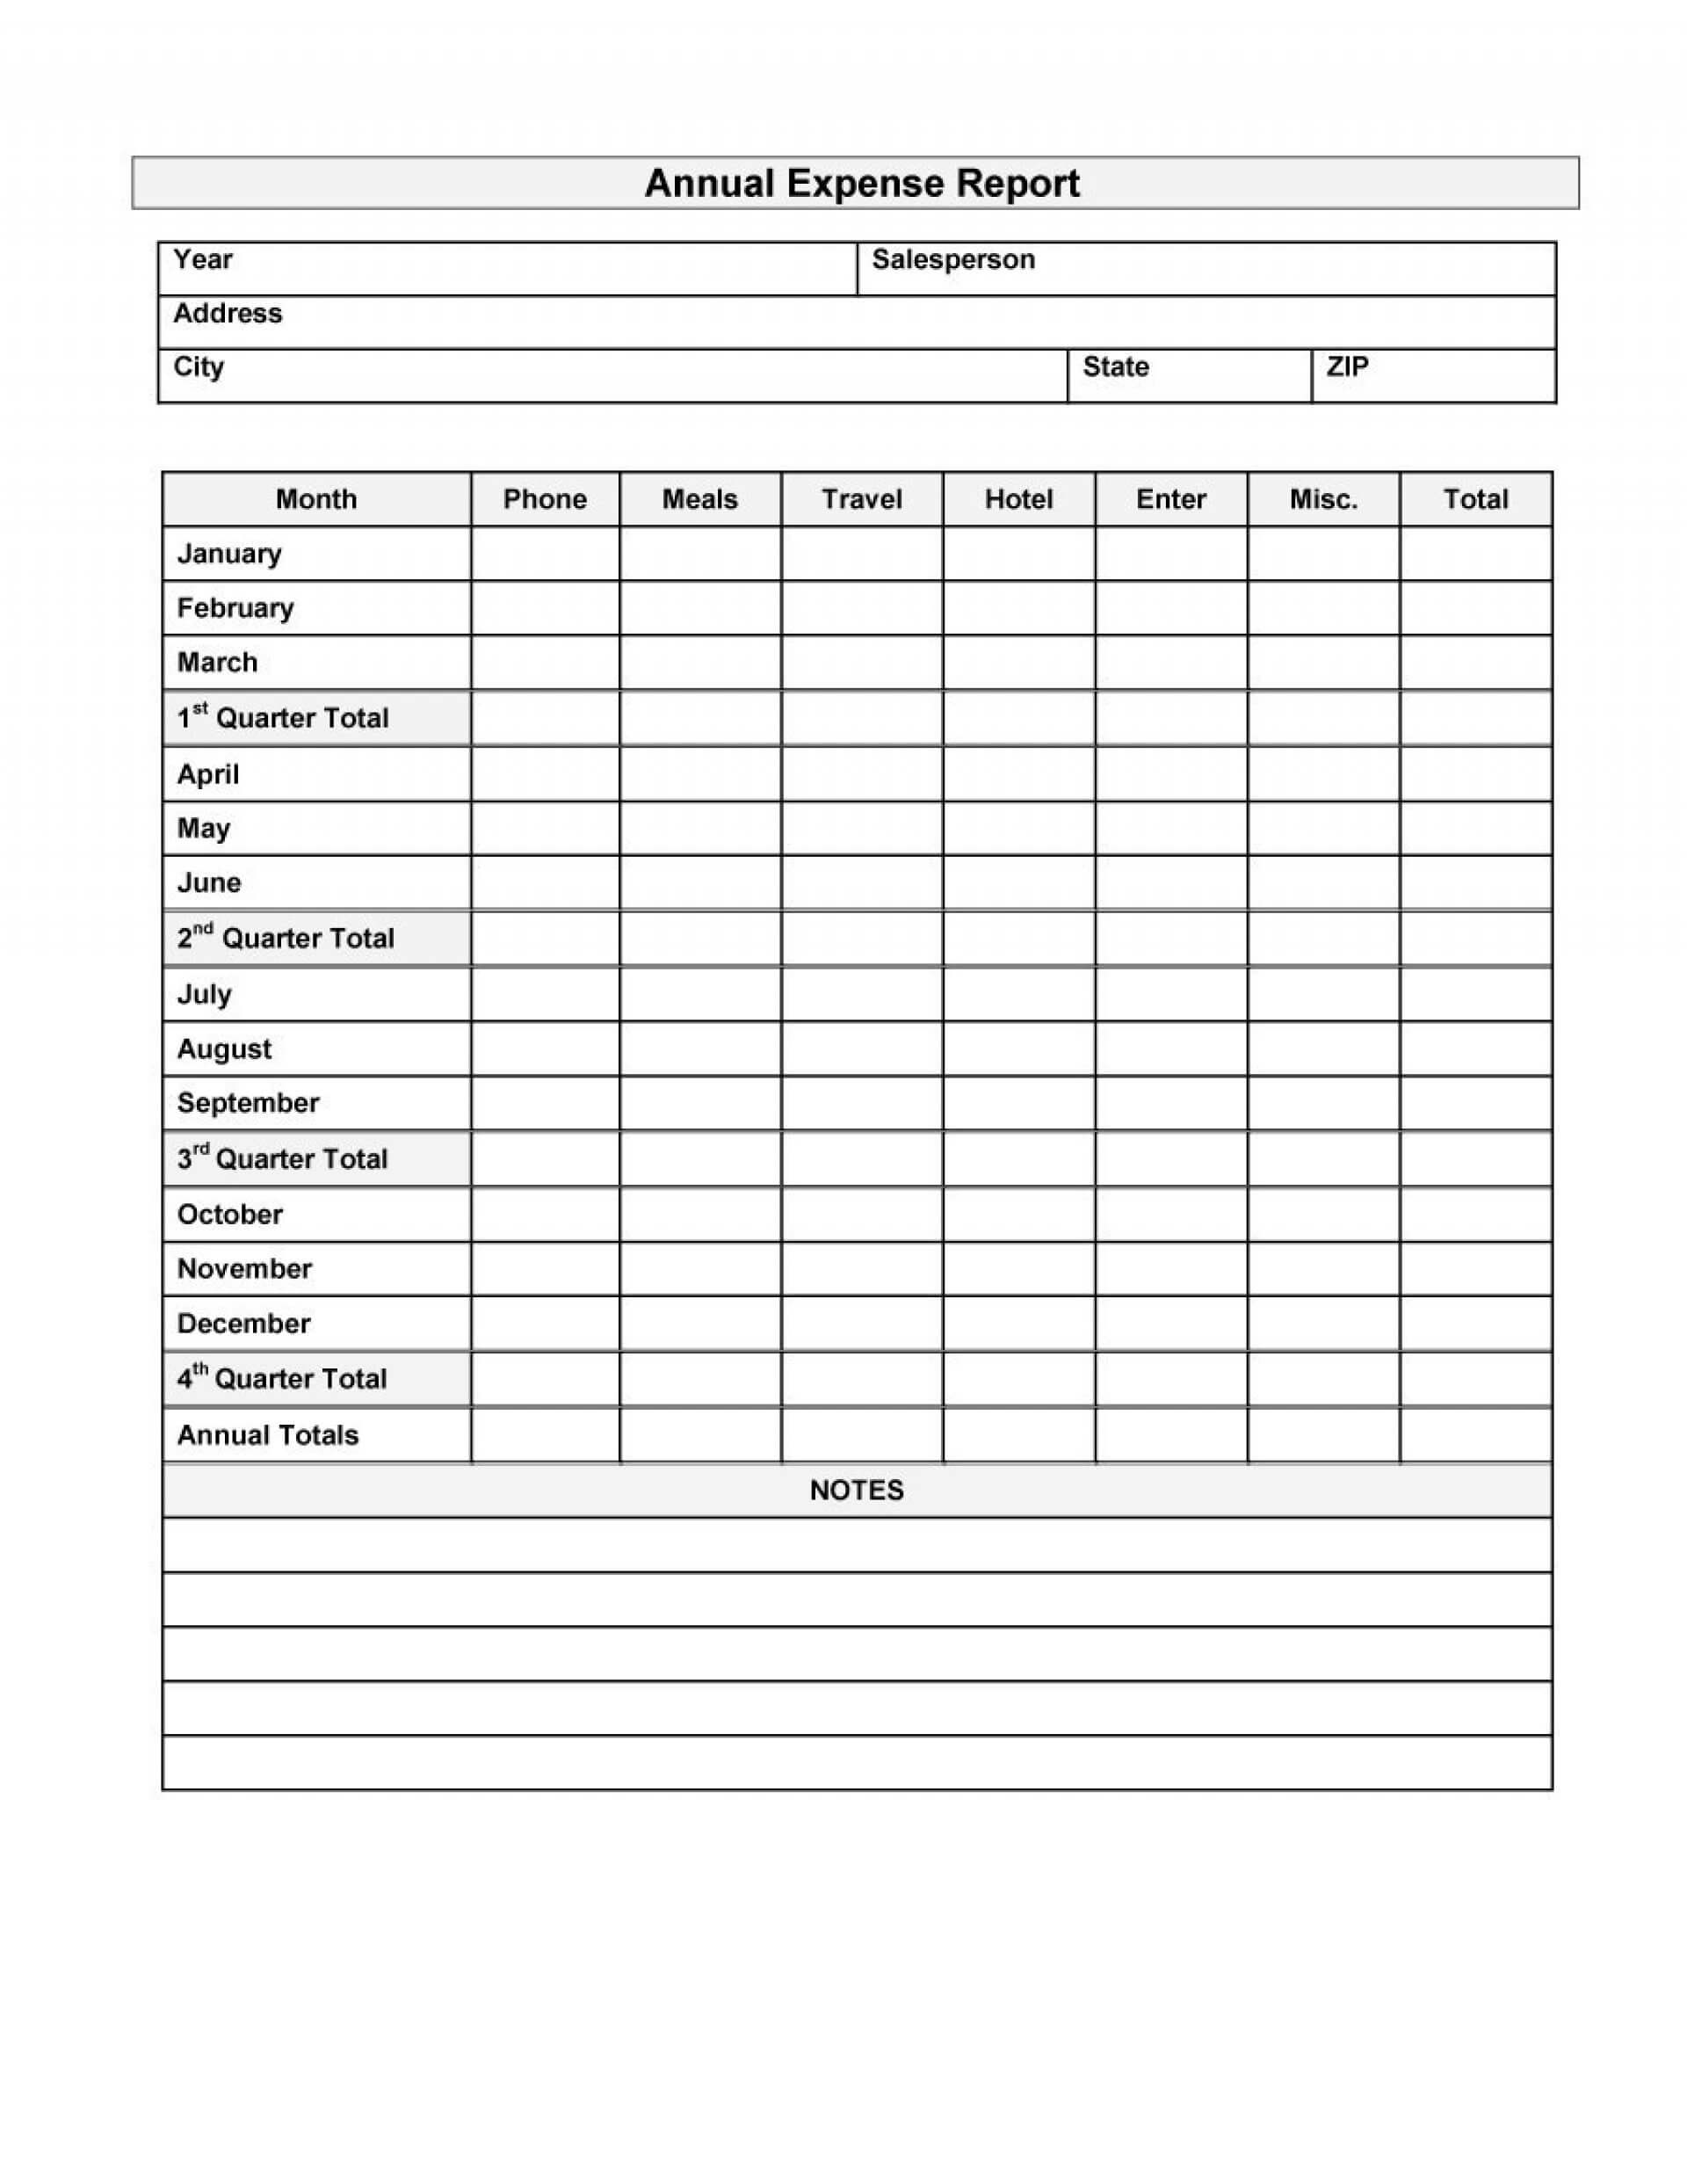 025 Expenses Report Template Excel Expense Magnificent Ideas In Expense Report Template Excel 2010